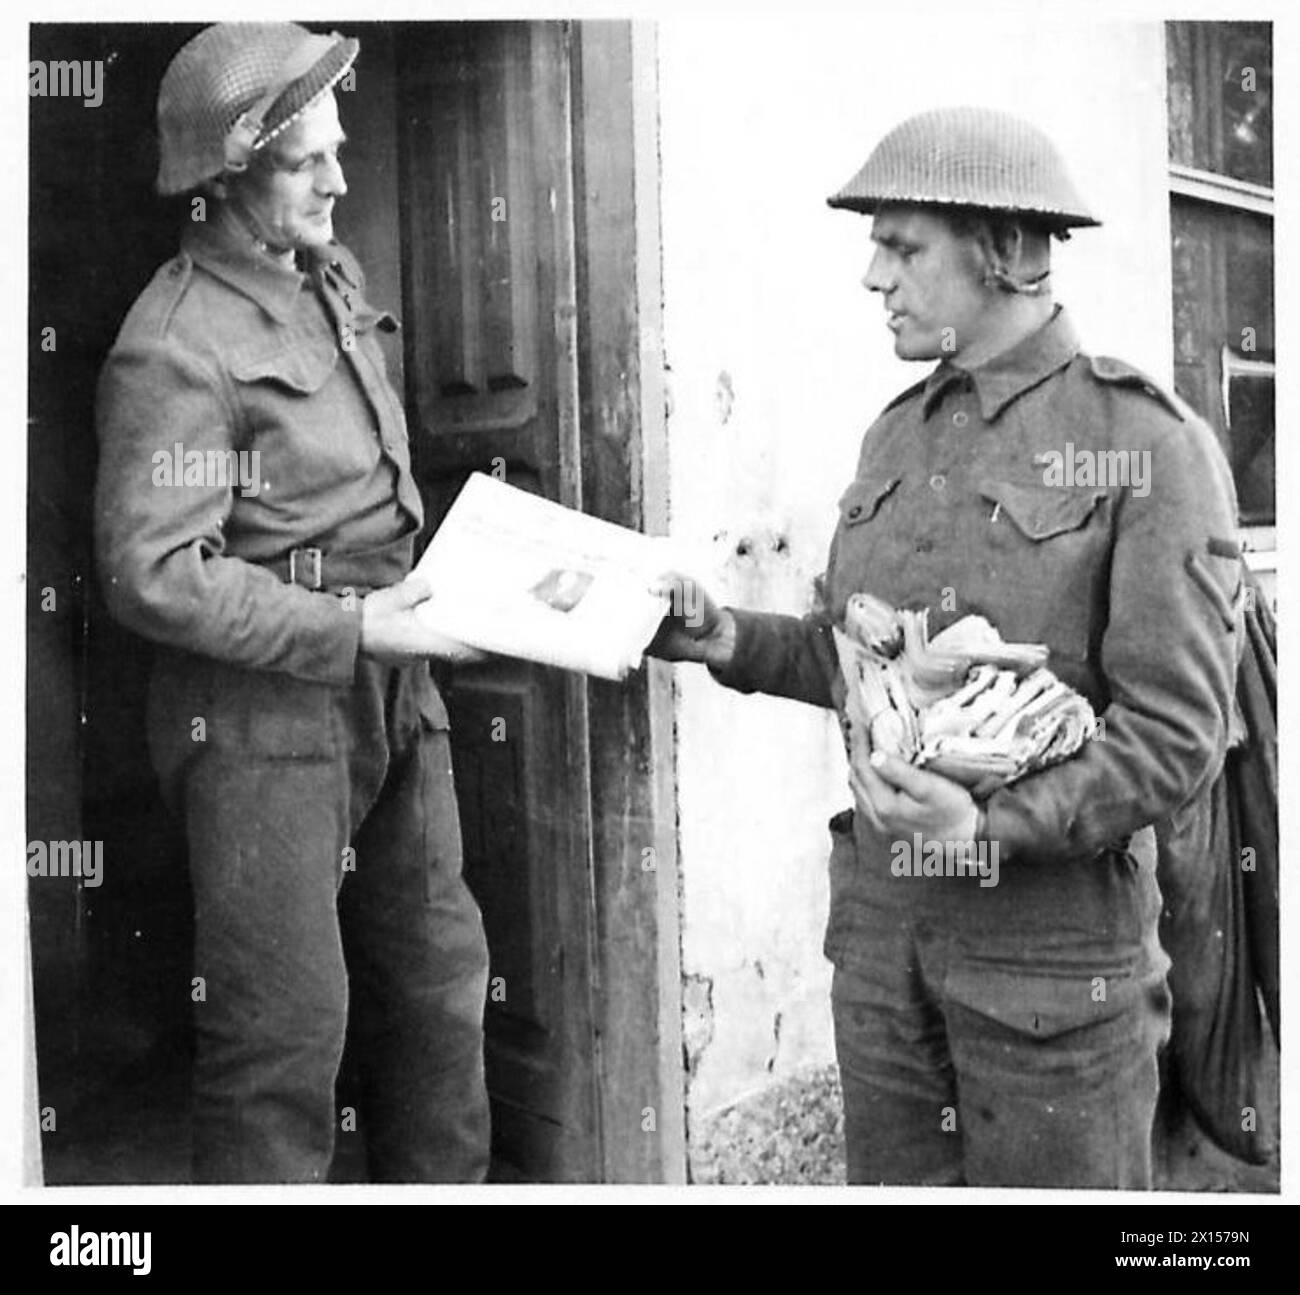 FIFTH ARMY : THE ARMY POST OFFICE IN THE ANZIO BRIDGEHEAD - Spr. A.R. Sheffers of 6, Osterly Street, Swansea, hands a Unit's quota of 'Union Jacks' to L/Cpl. S. Gordon of 26 Church Street, Dufftown, Banffshire. Spr. Sheffers has 26 years in the service of Swansea G.P.O. to his credit British Army Stock Photo